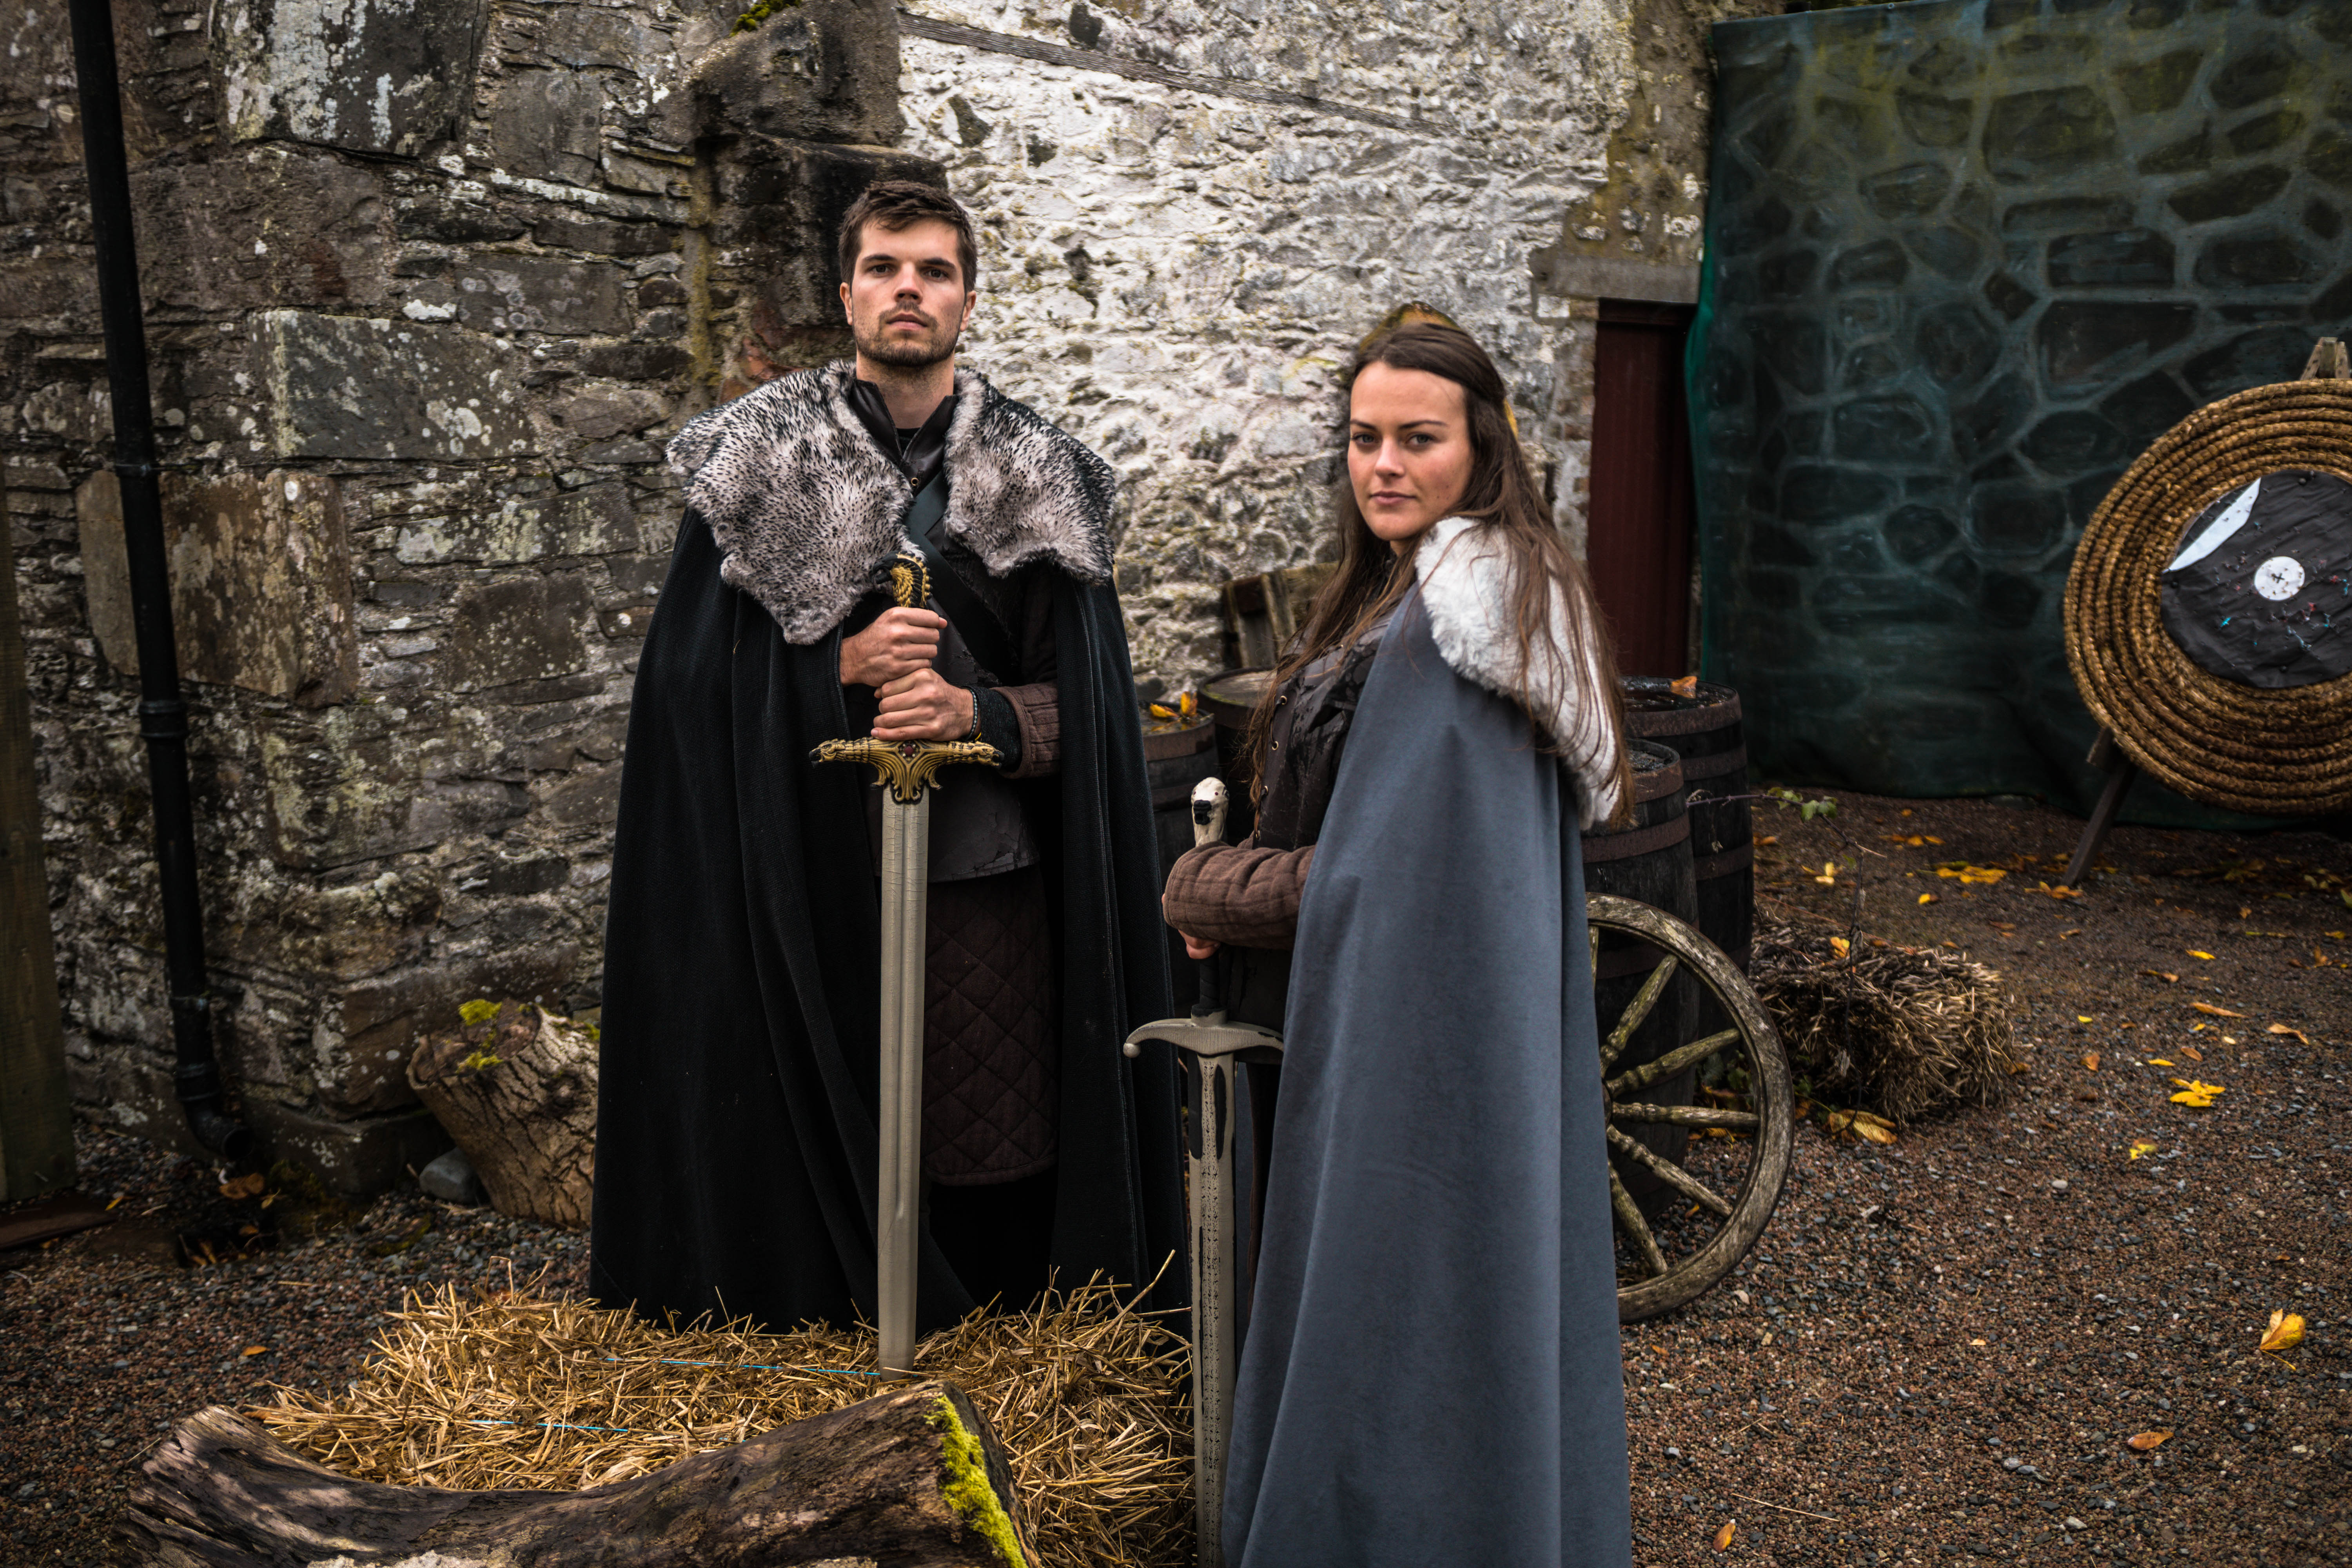 Winterfell tour Belfast: Explore the set of the Game of Thrones Winterfell Castle all while dressed up for the part!